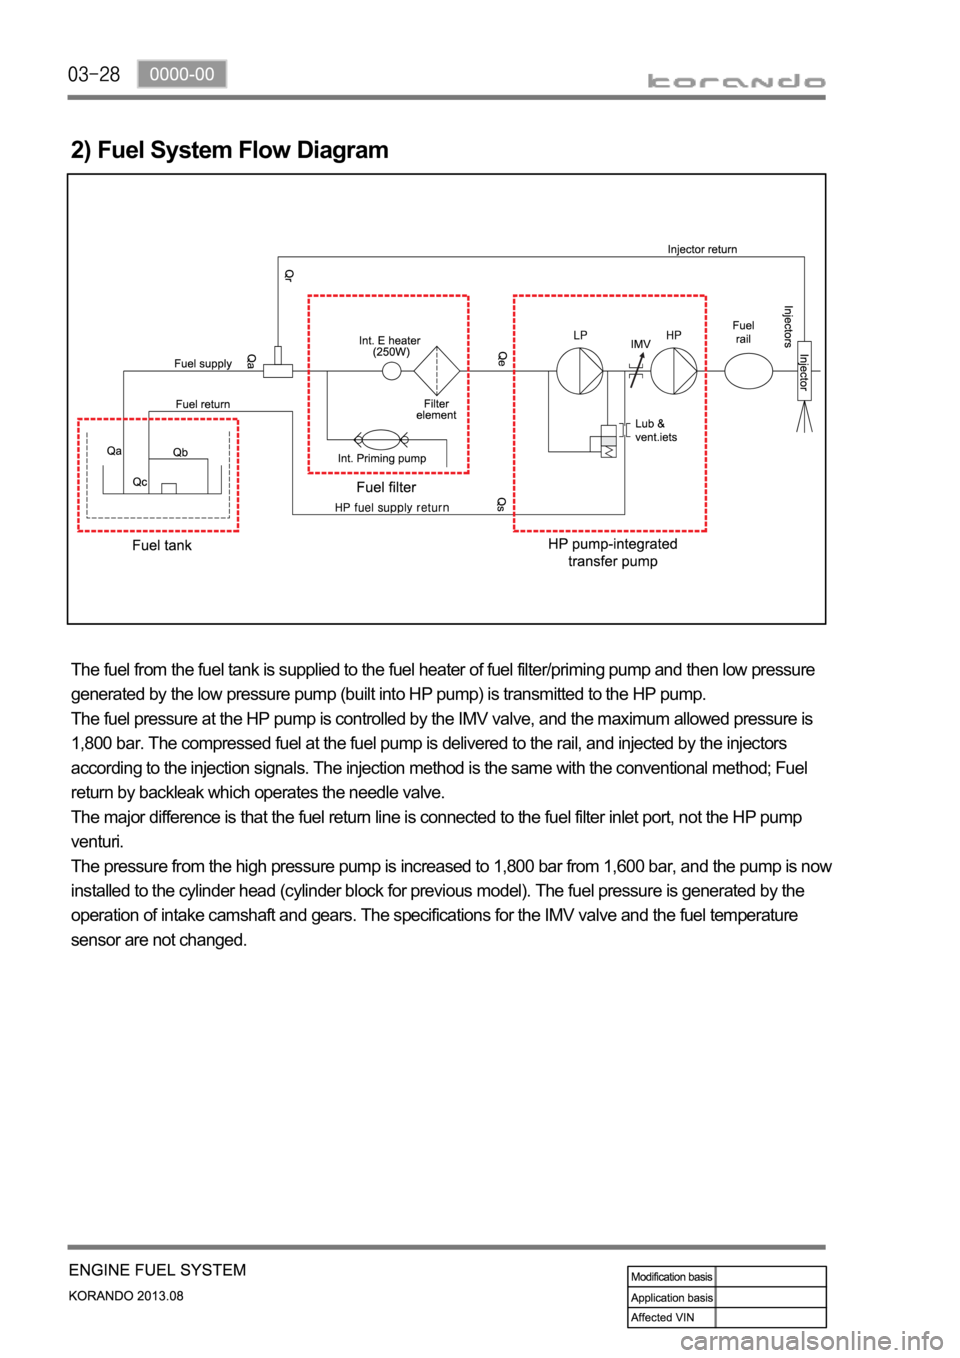 SSANGYONG KORANDO 2013  Service Manual 2) Fuel System Flow Diagram
The fuel from the fuel tank is supplied to the fuel heater of fuel filter/priming pump and then low pressure 
generated by the low pressure pump (built into HP pump) is tra